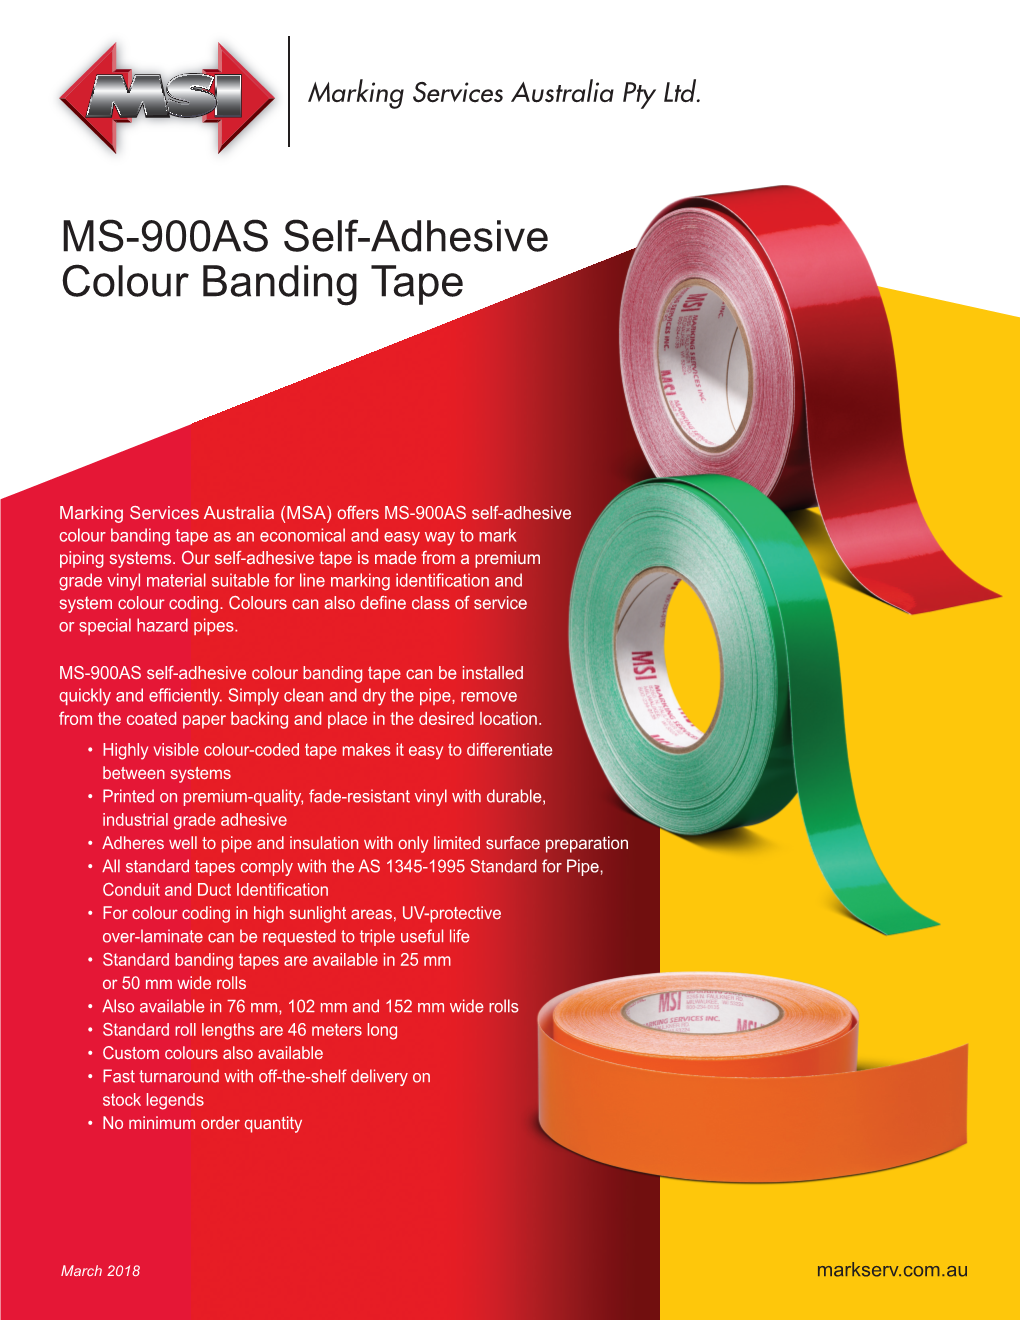 MS-900AS Self-Adhesive Colour Banding Tape